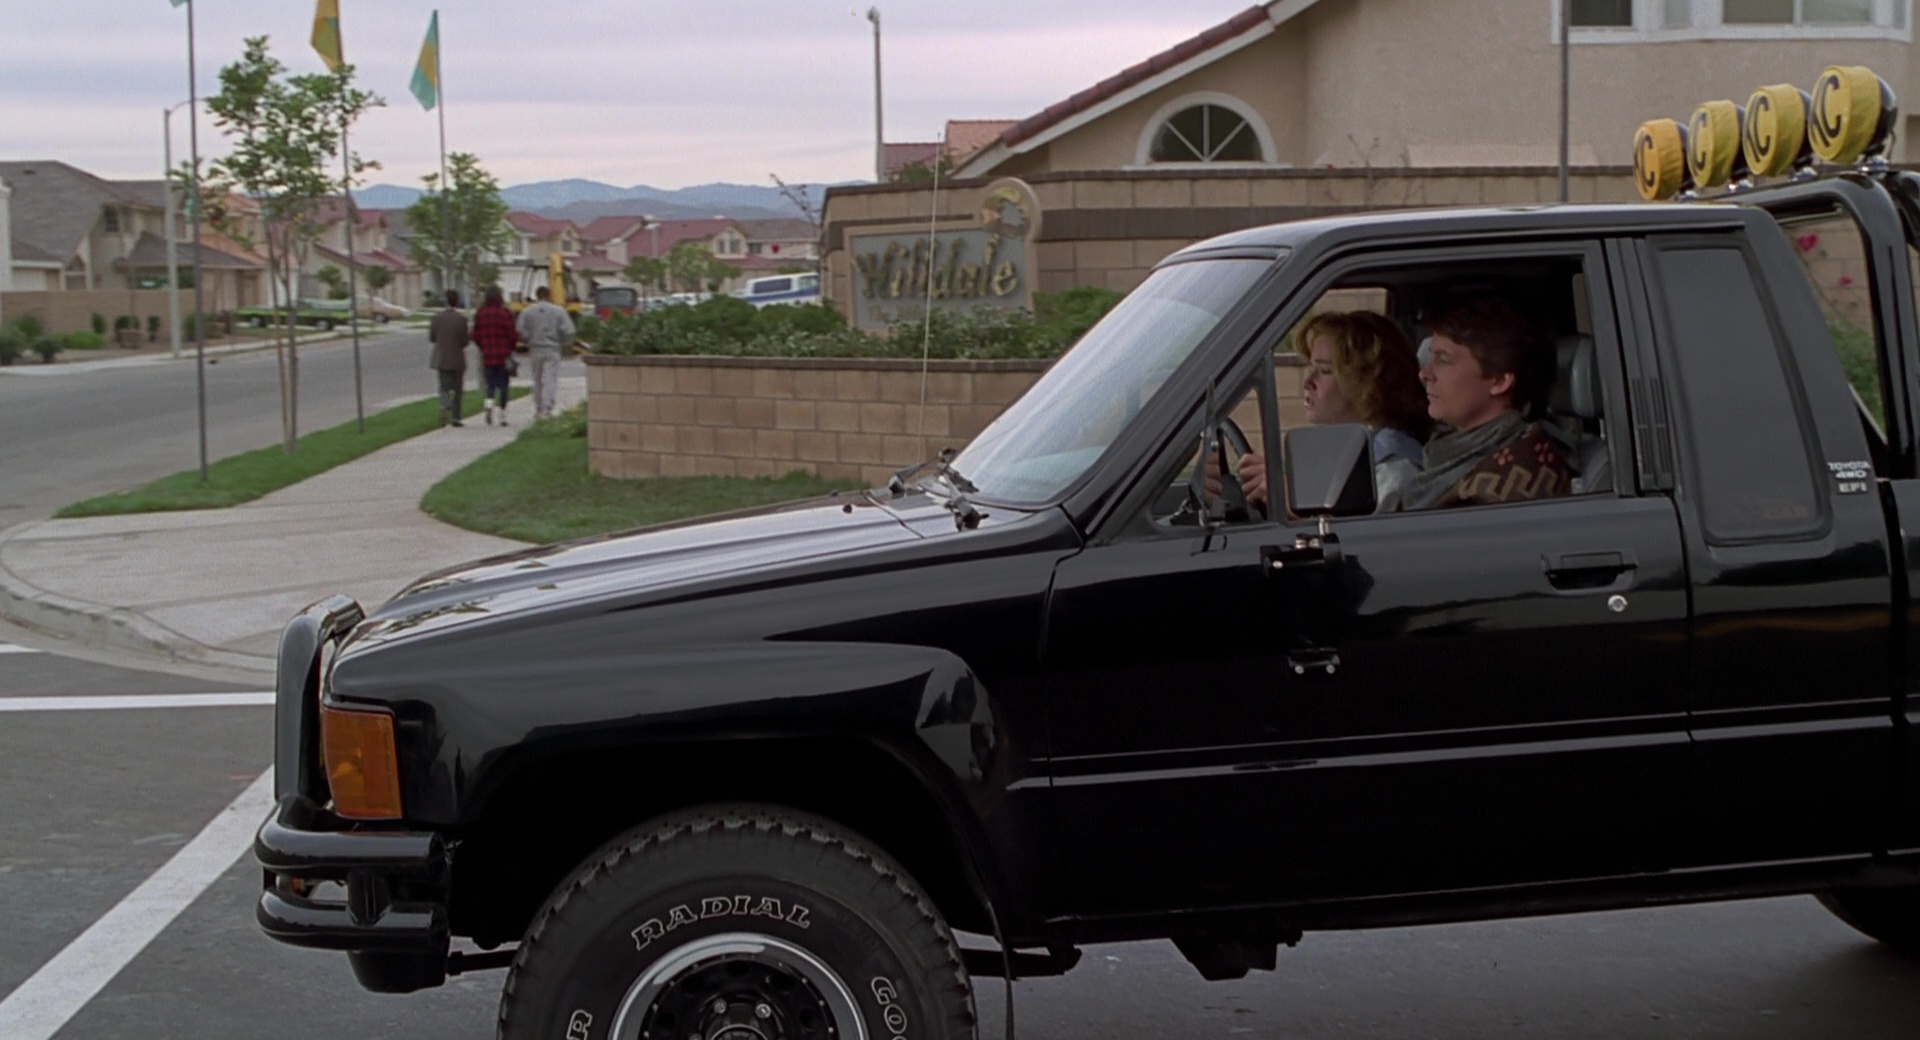 Toyota SR5 Pickup Truck Used by Michael J. Fox (Marty McFly) in Back to the Future ...1920 x 1040